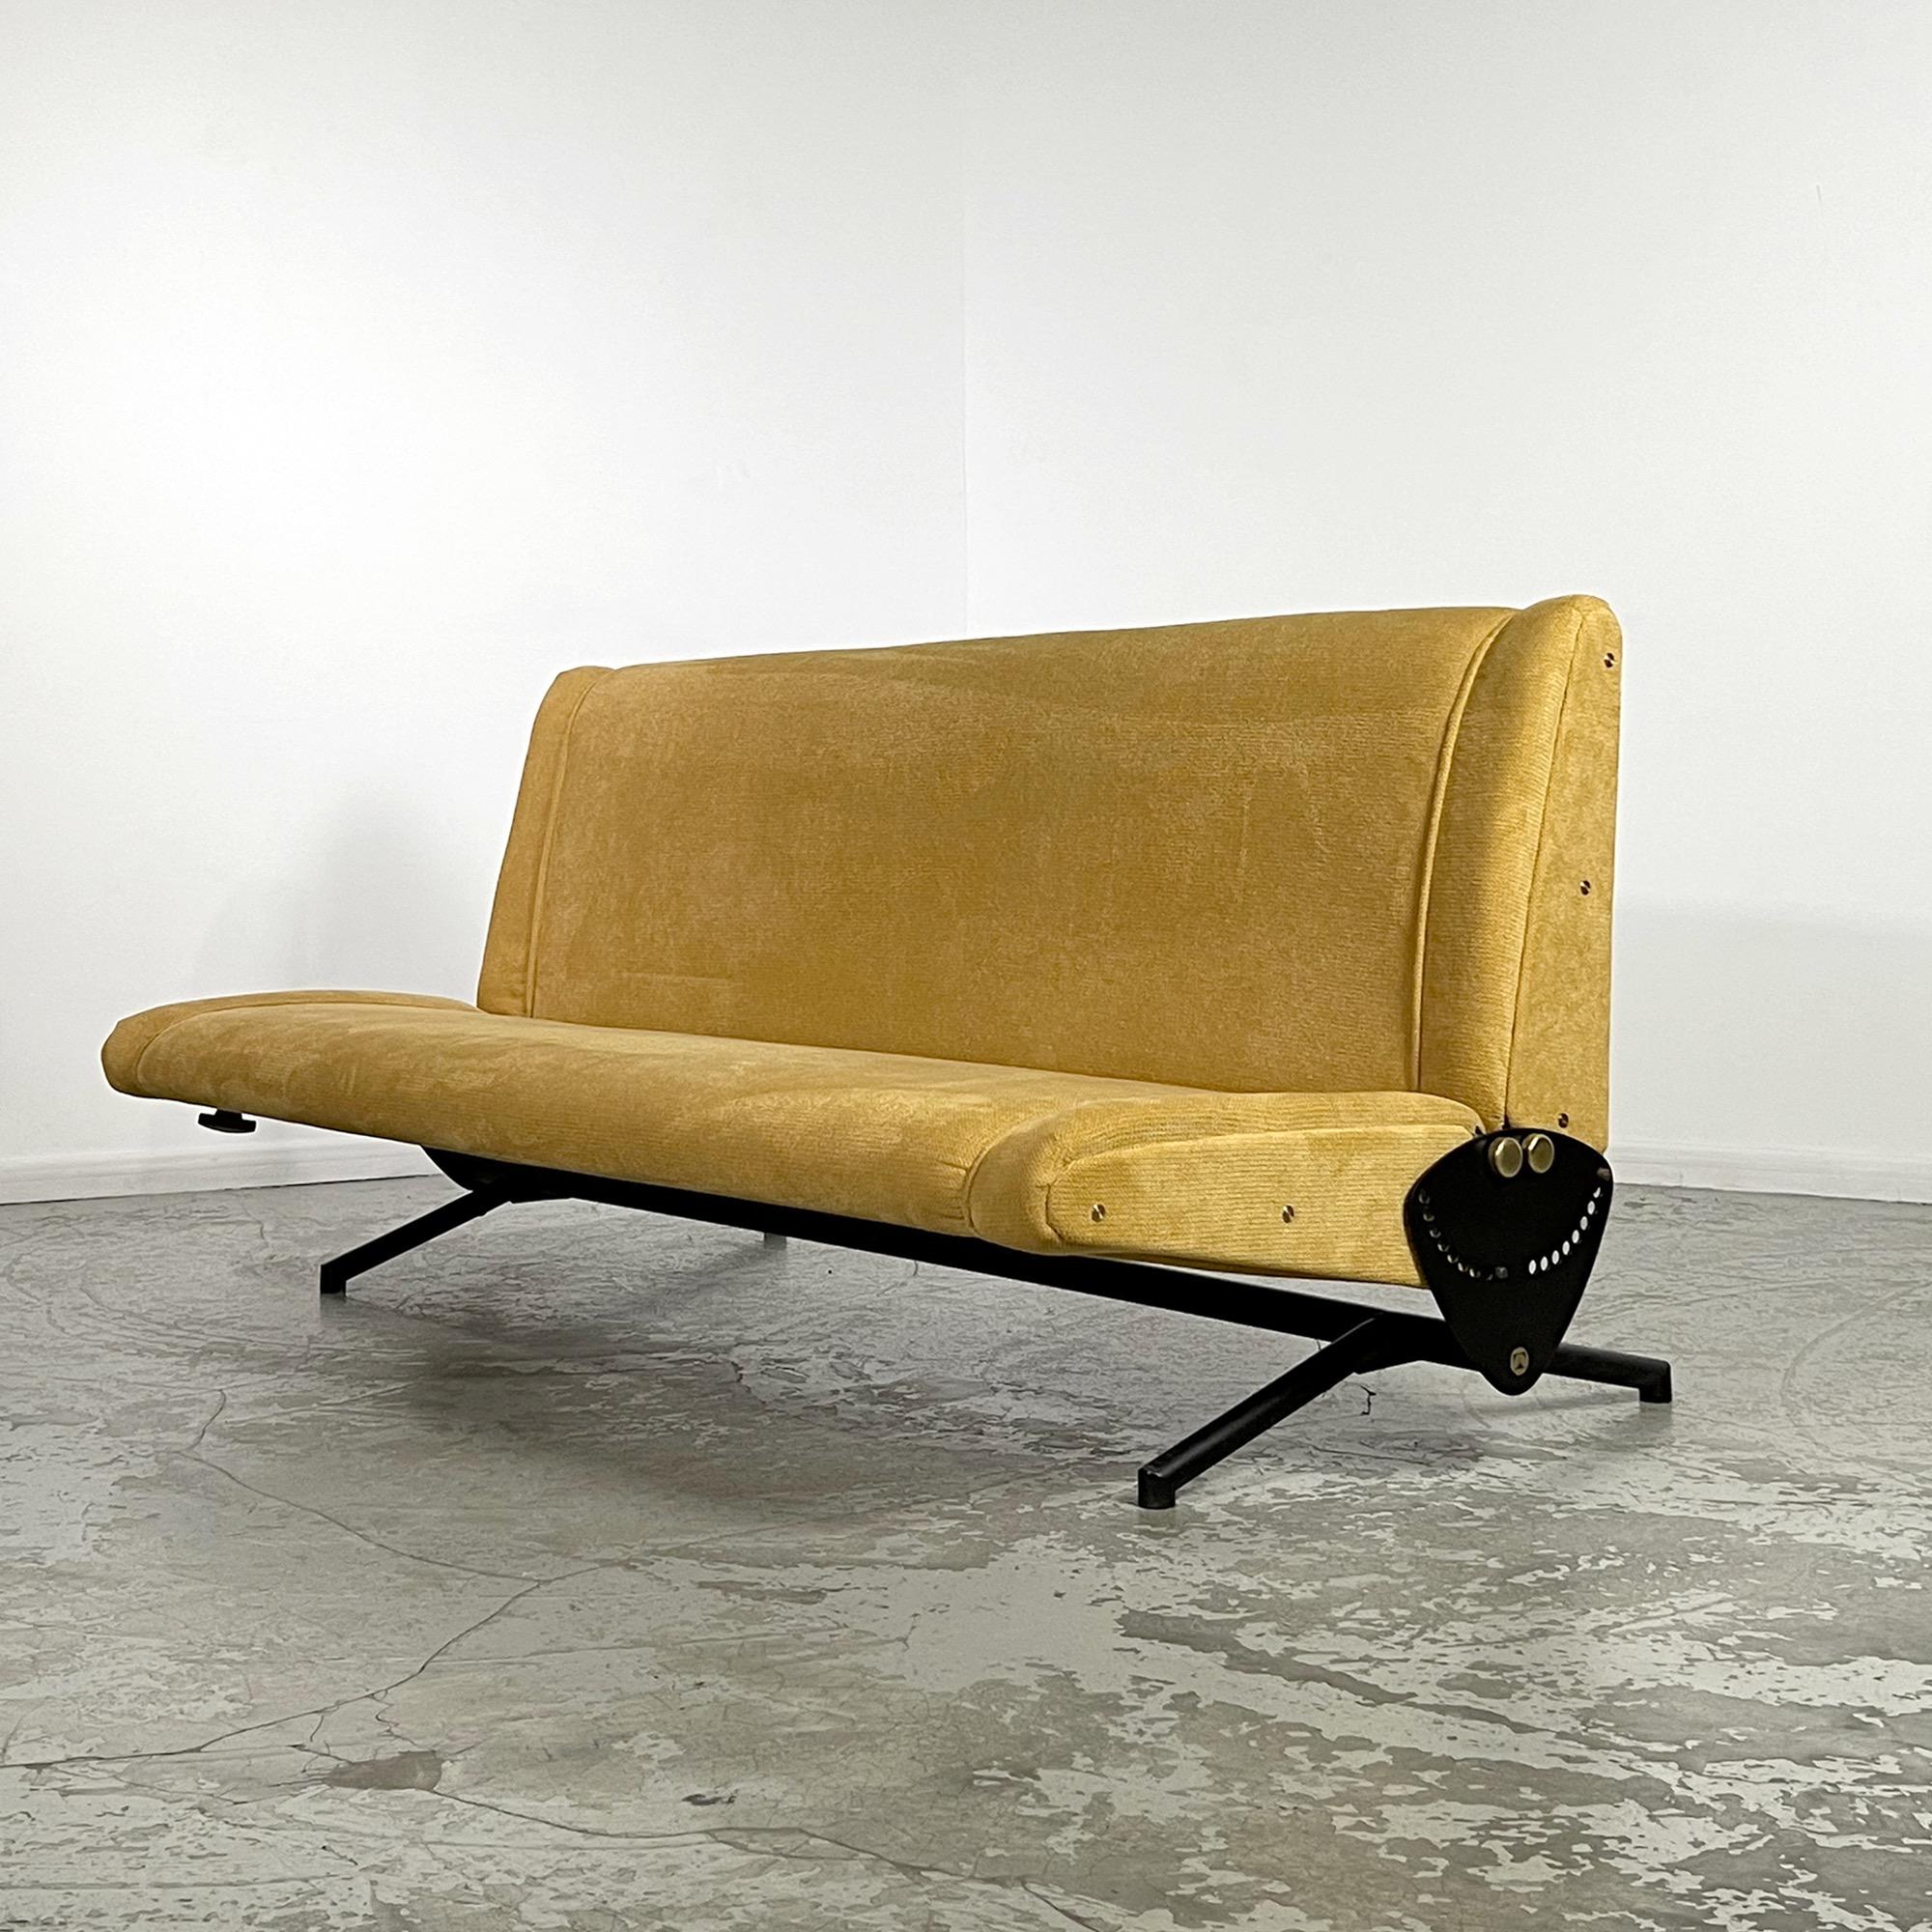 Sofa bed D70 by Osvaldo Borsani for Tecno. The Italian firm was founded by the Borsani twins in 1953. The following year he presented his first project for the firm, the D70, at the Triennale, winning the Compasso d'oro for this creation, which is